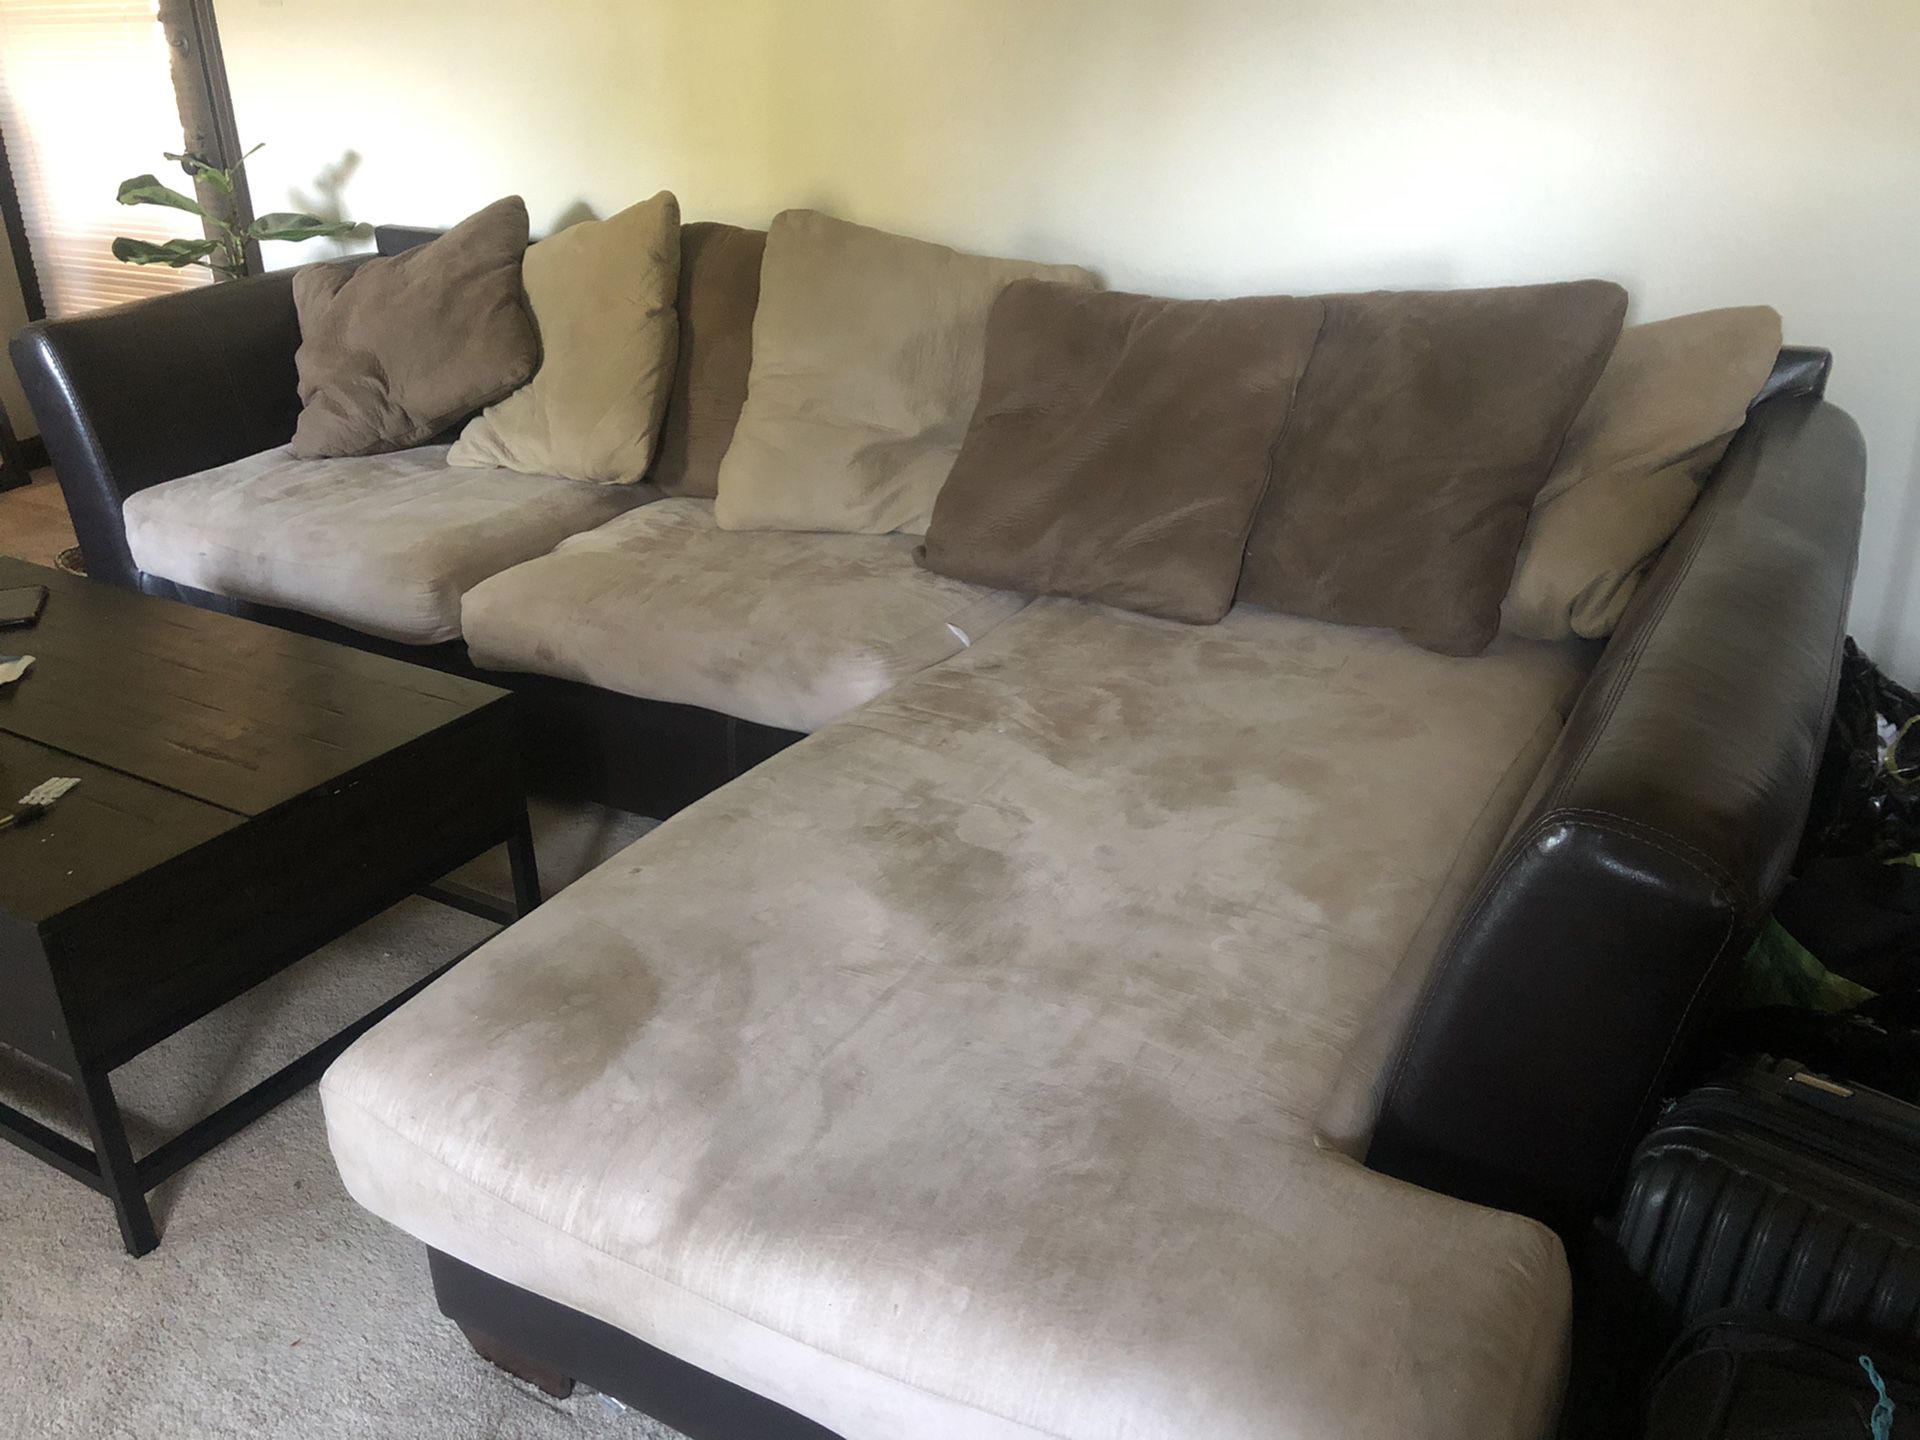 Free Couch!!!